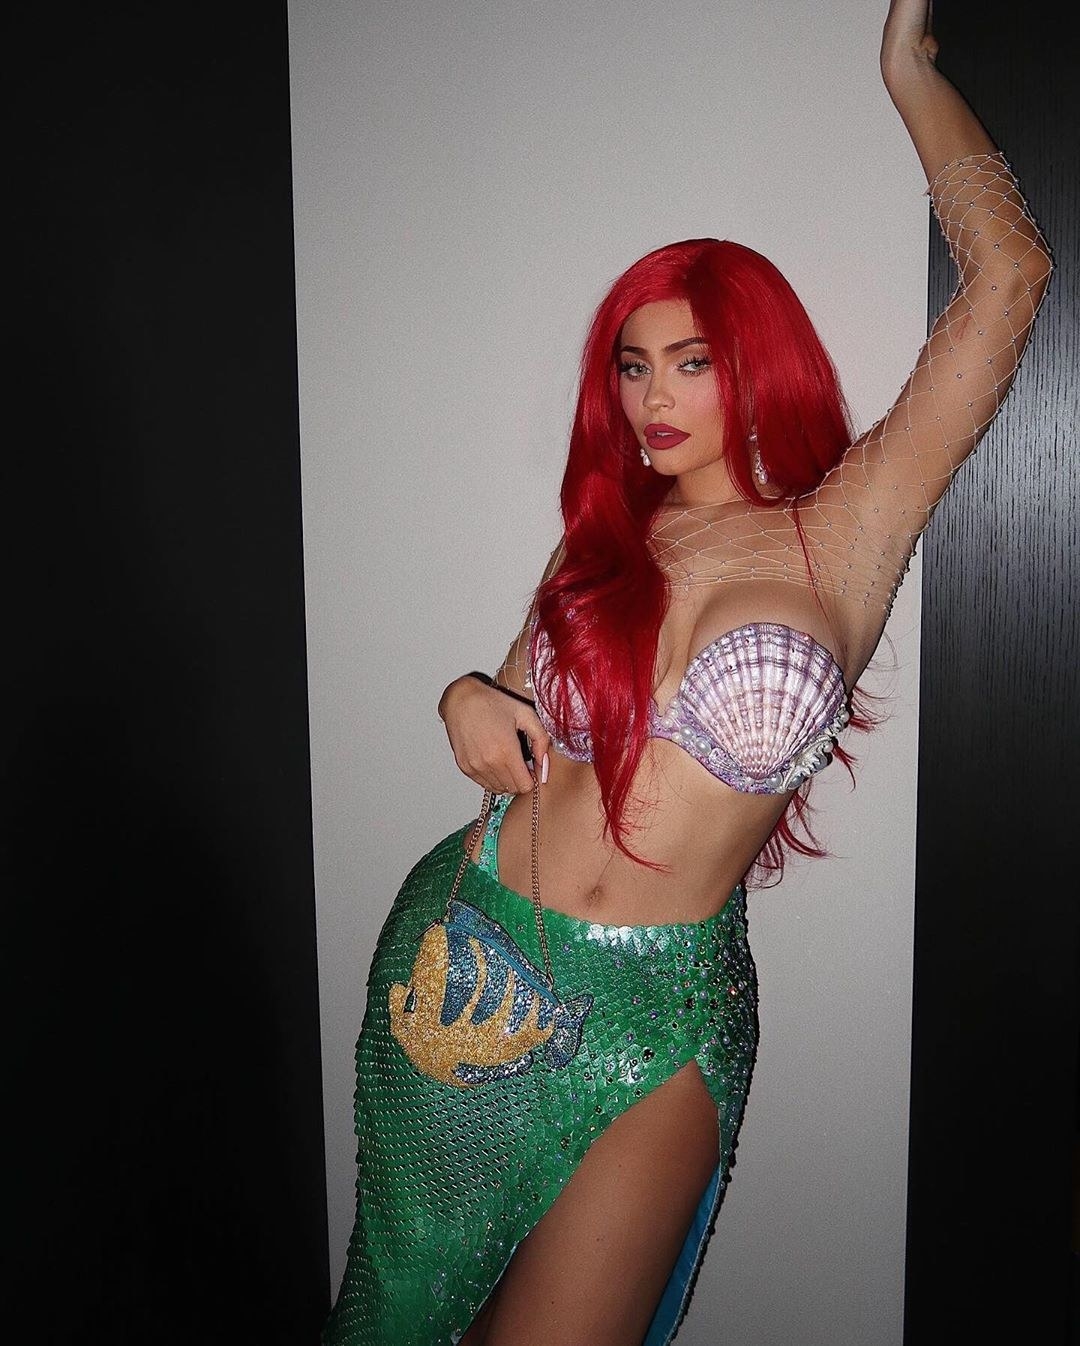 Kylie Jenner wows as she transforms into Ariel from The Little